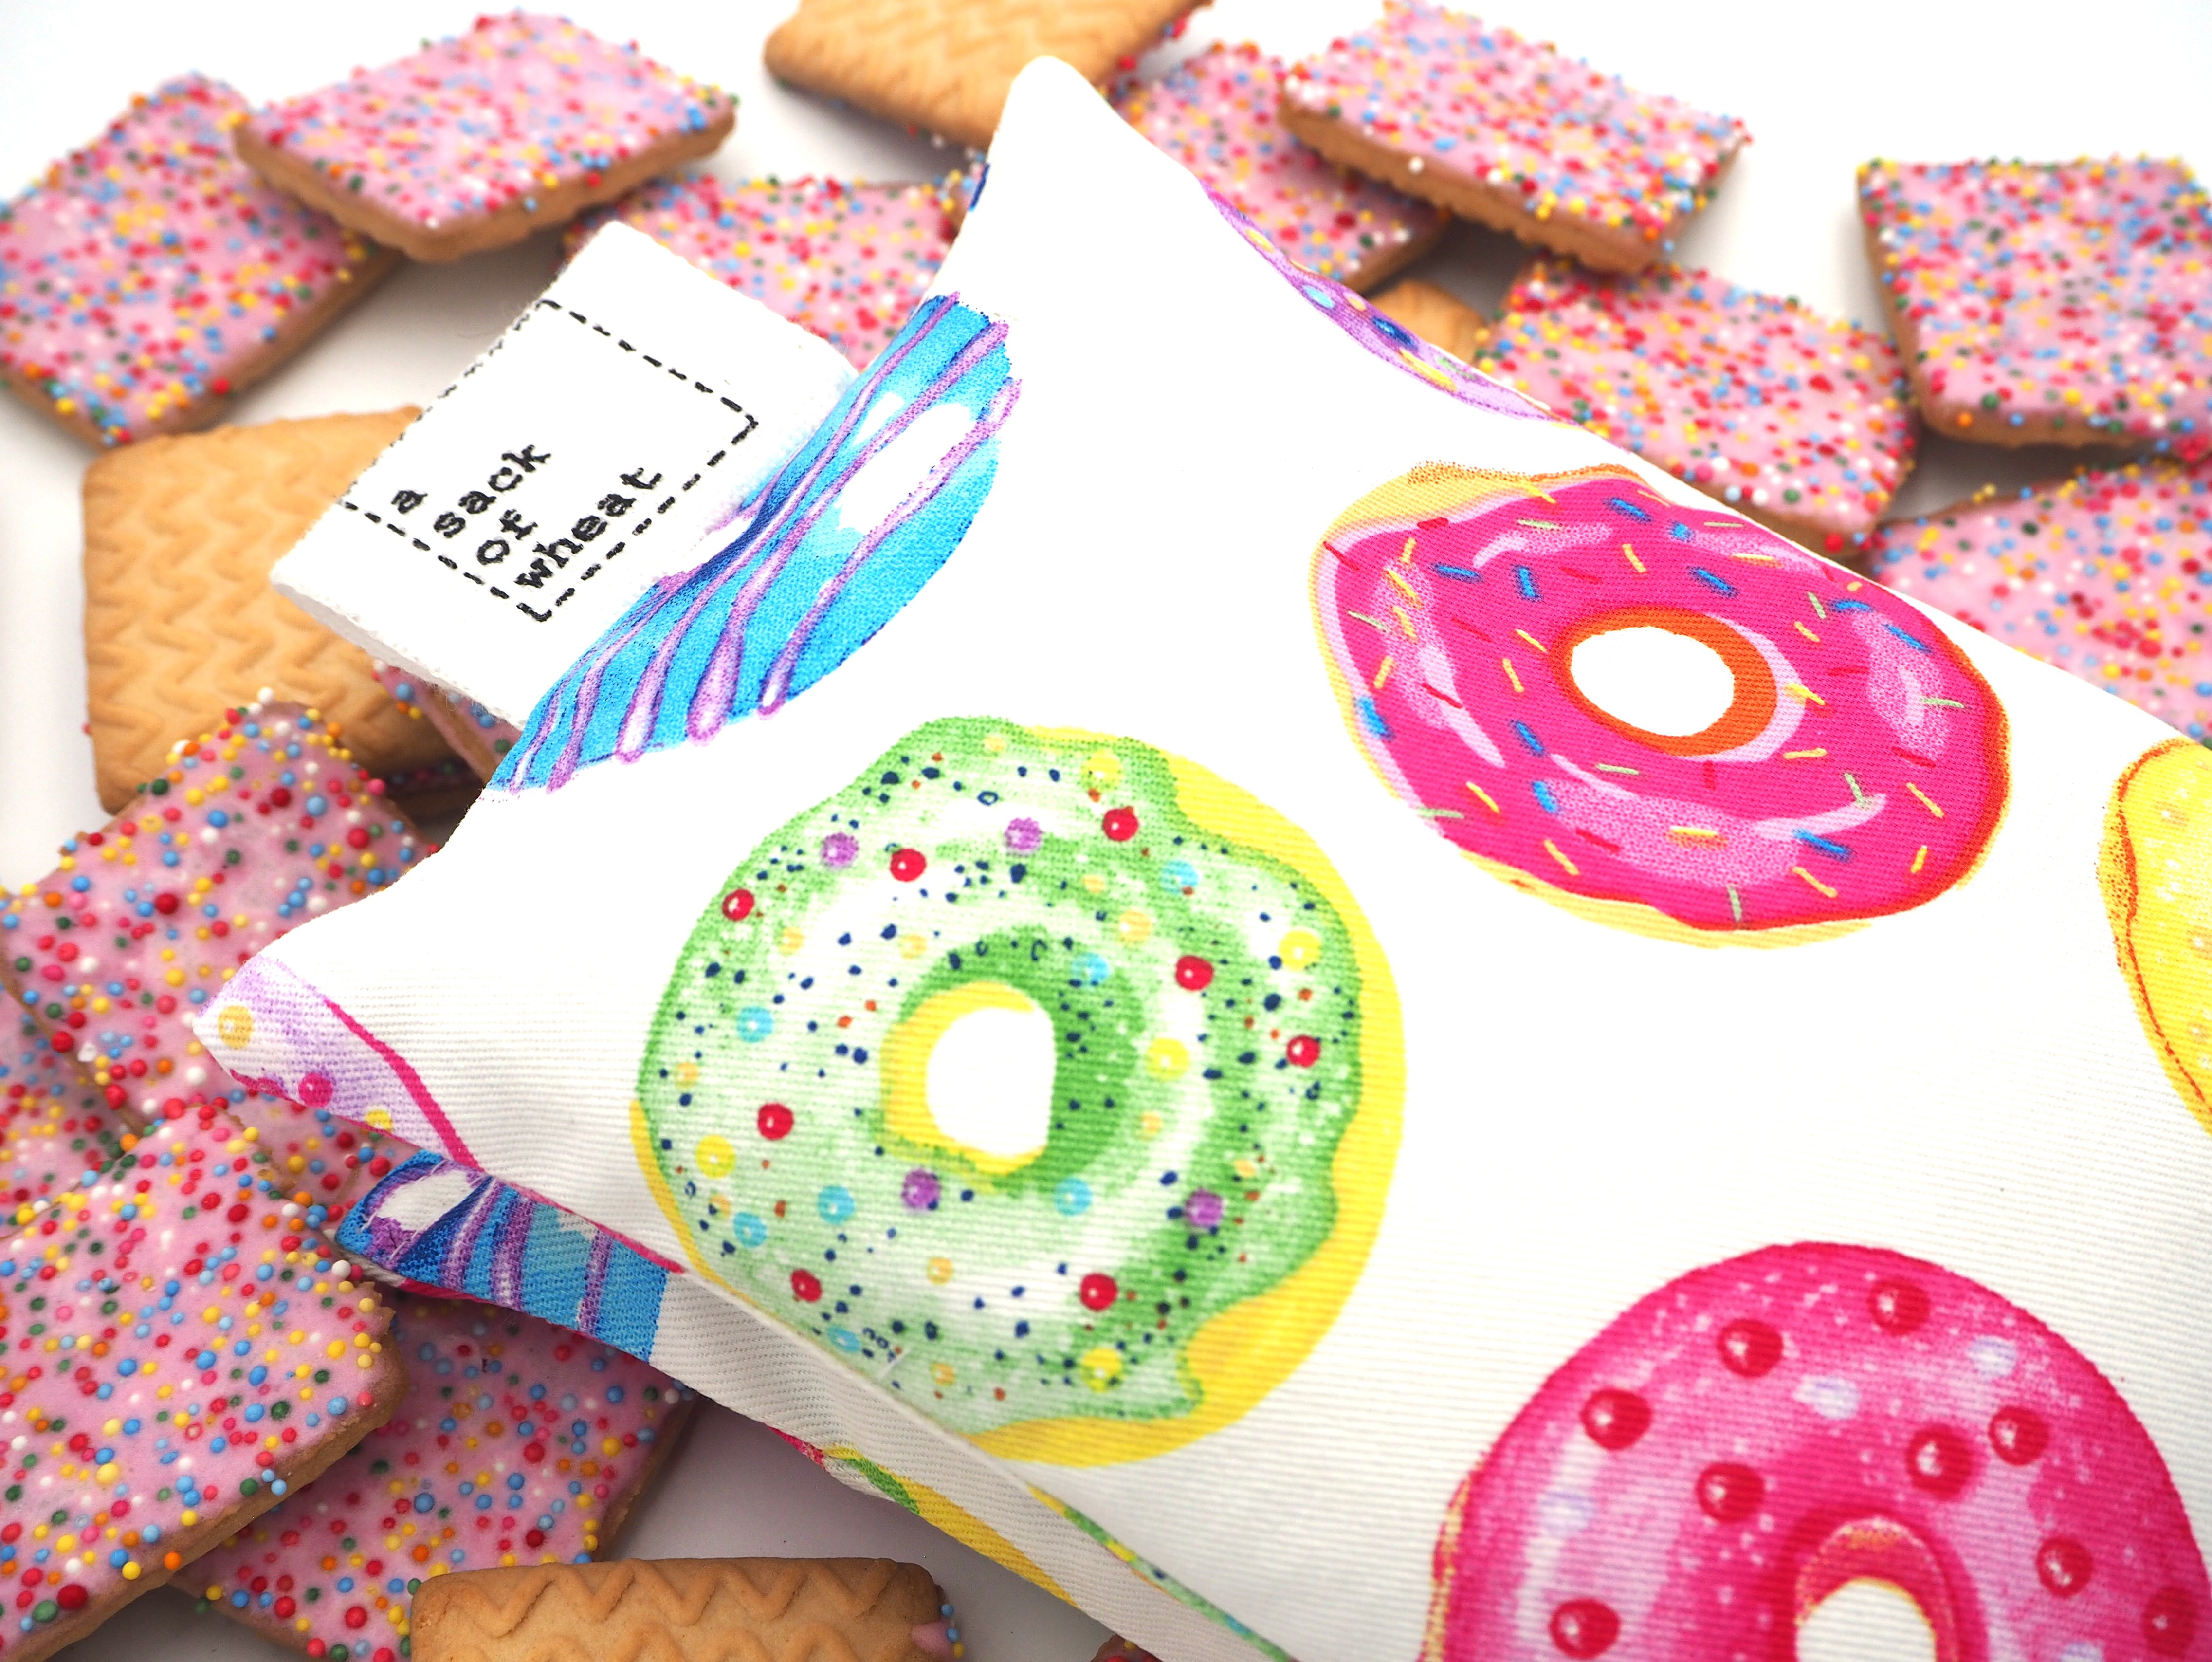 All-Natural Wheat Bag - Donuts | A Sack Of Wheat